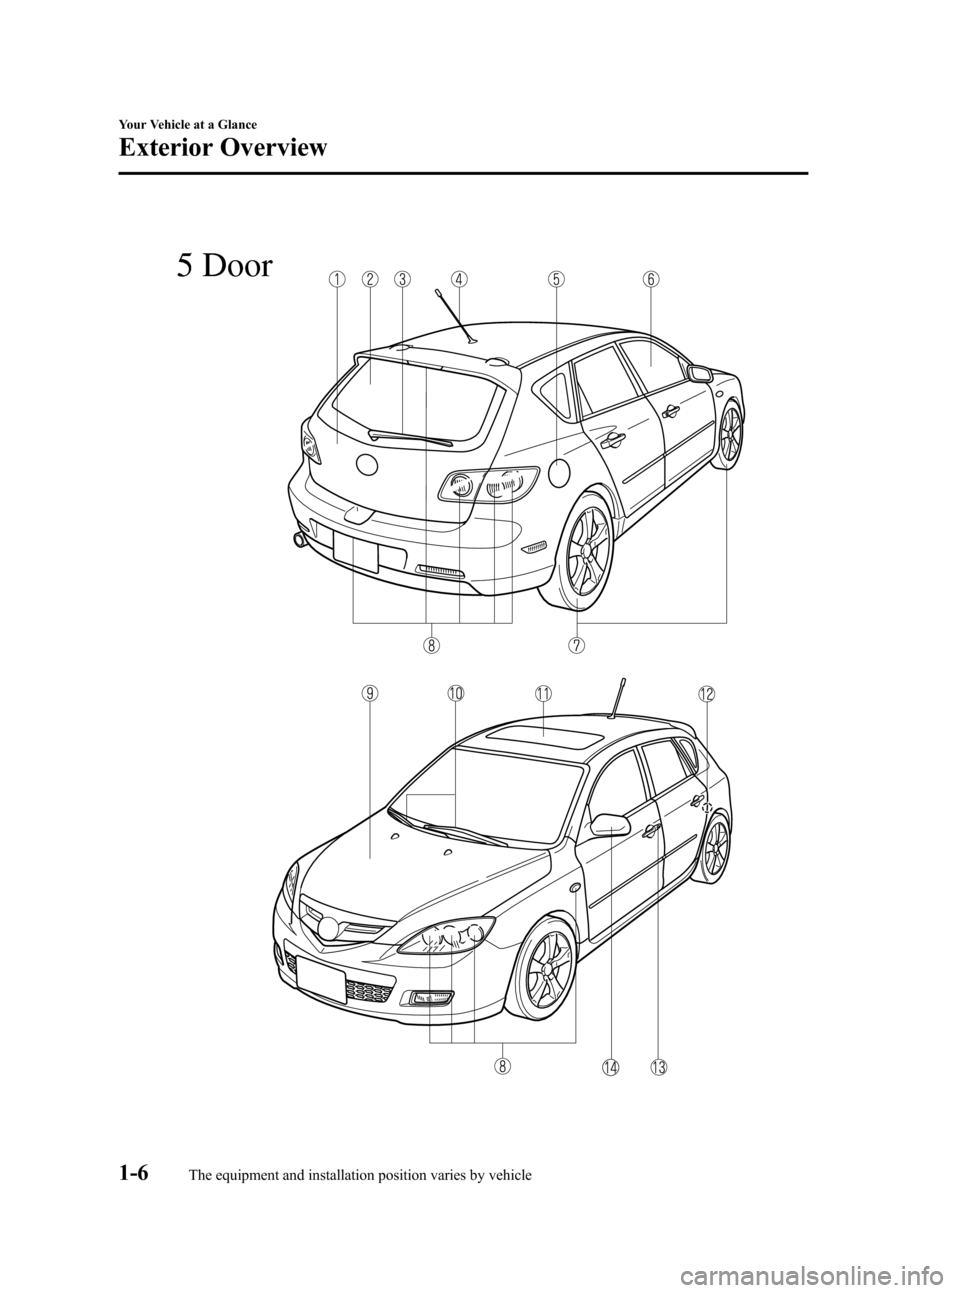 MAZDA MODEL 3 HATCHBACK 2008   (in English) User Guide Black plate (12,1)
5 Door
1-6
Your Vehicle at a Glance
The equipment and installation position varies by vehicle
Exterior Overview
Mazda3_8X41-EA-07F_Edition2 Page12
Monday, June 18 2007 1:27 PM
Form 